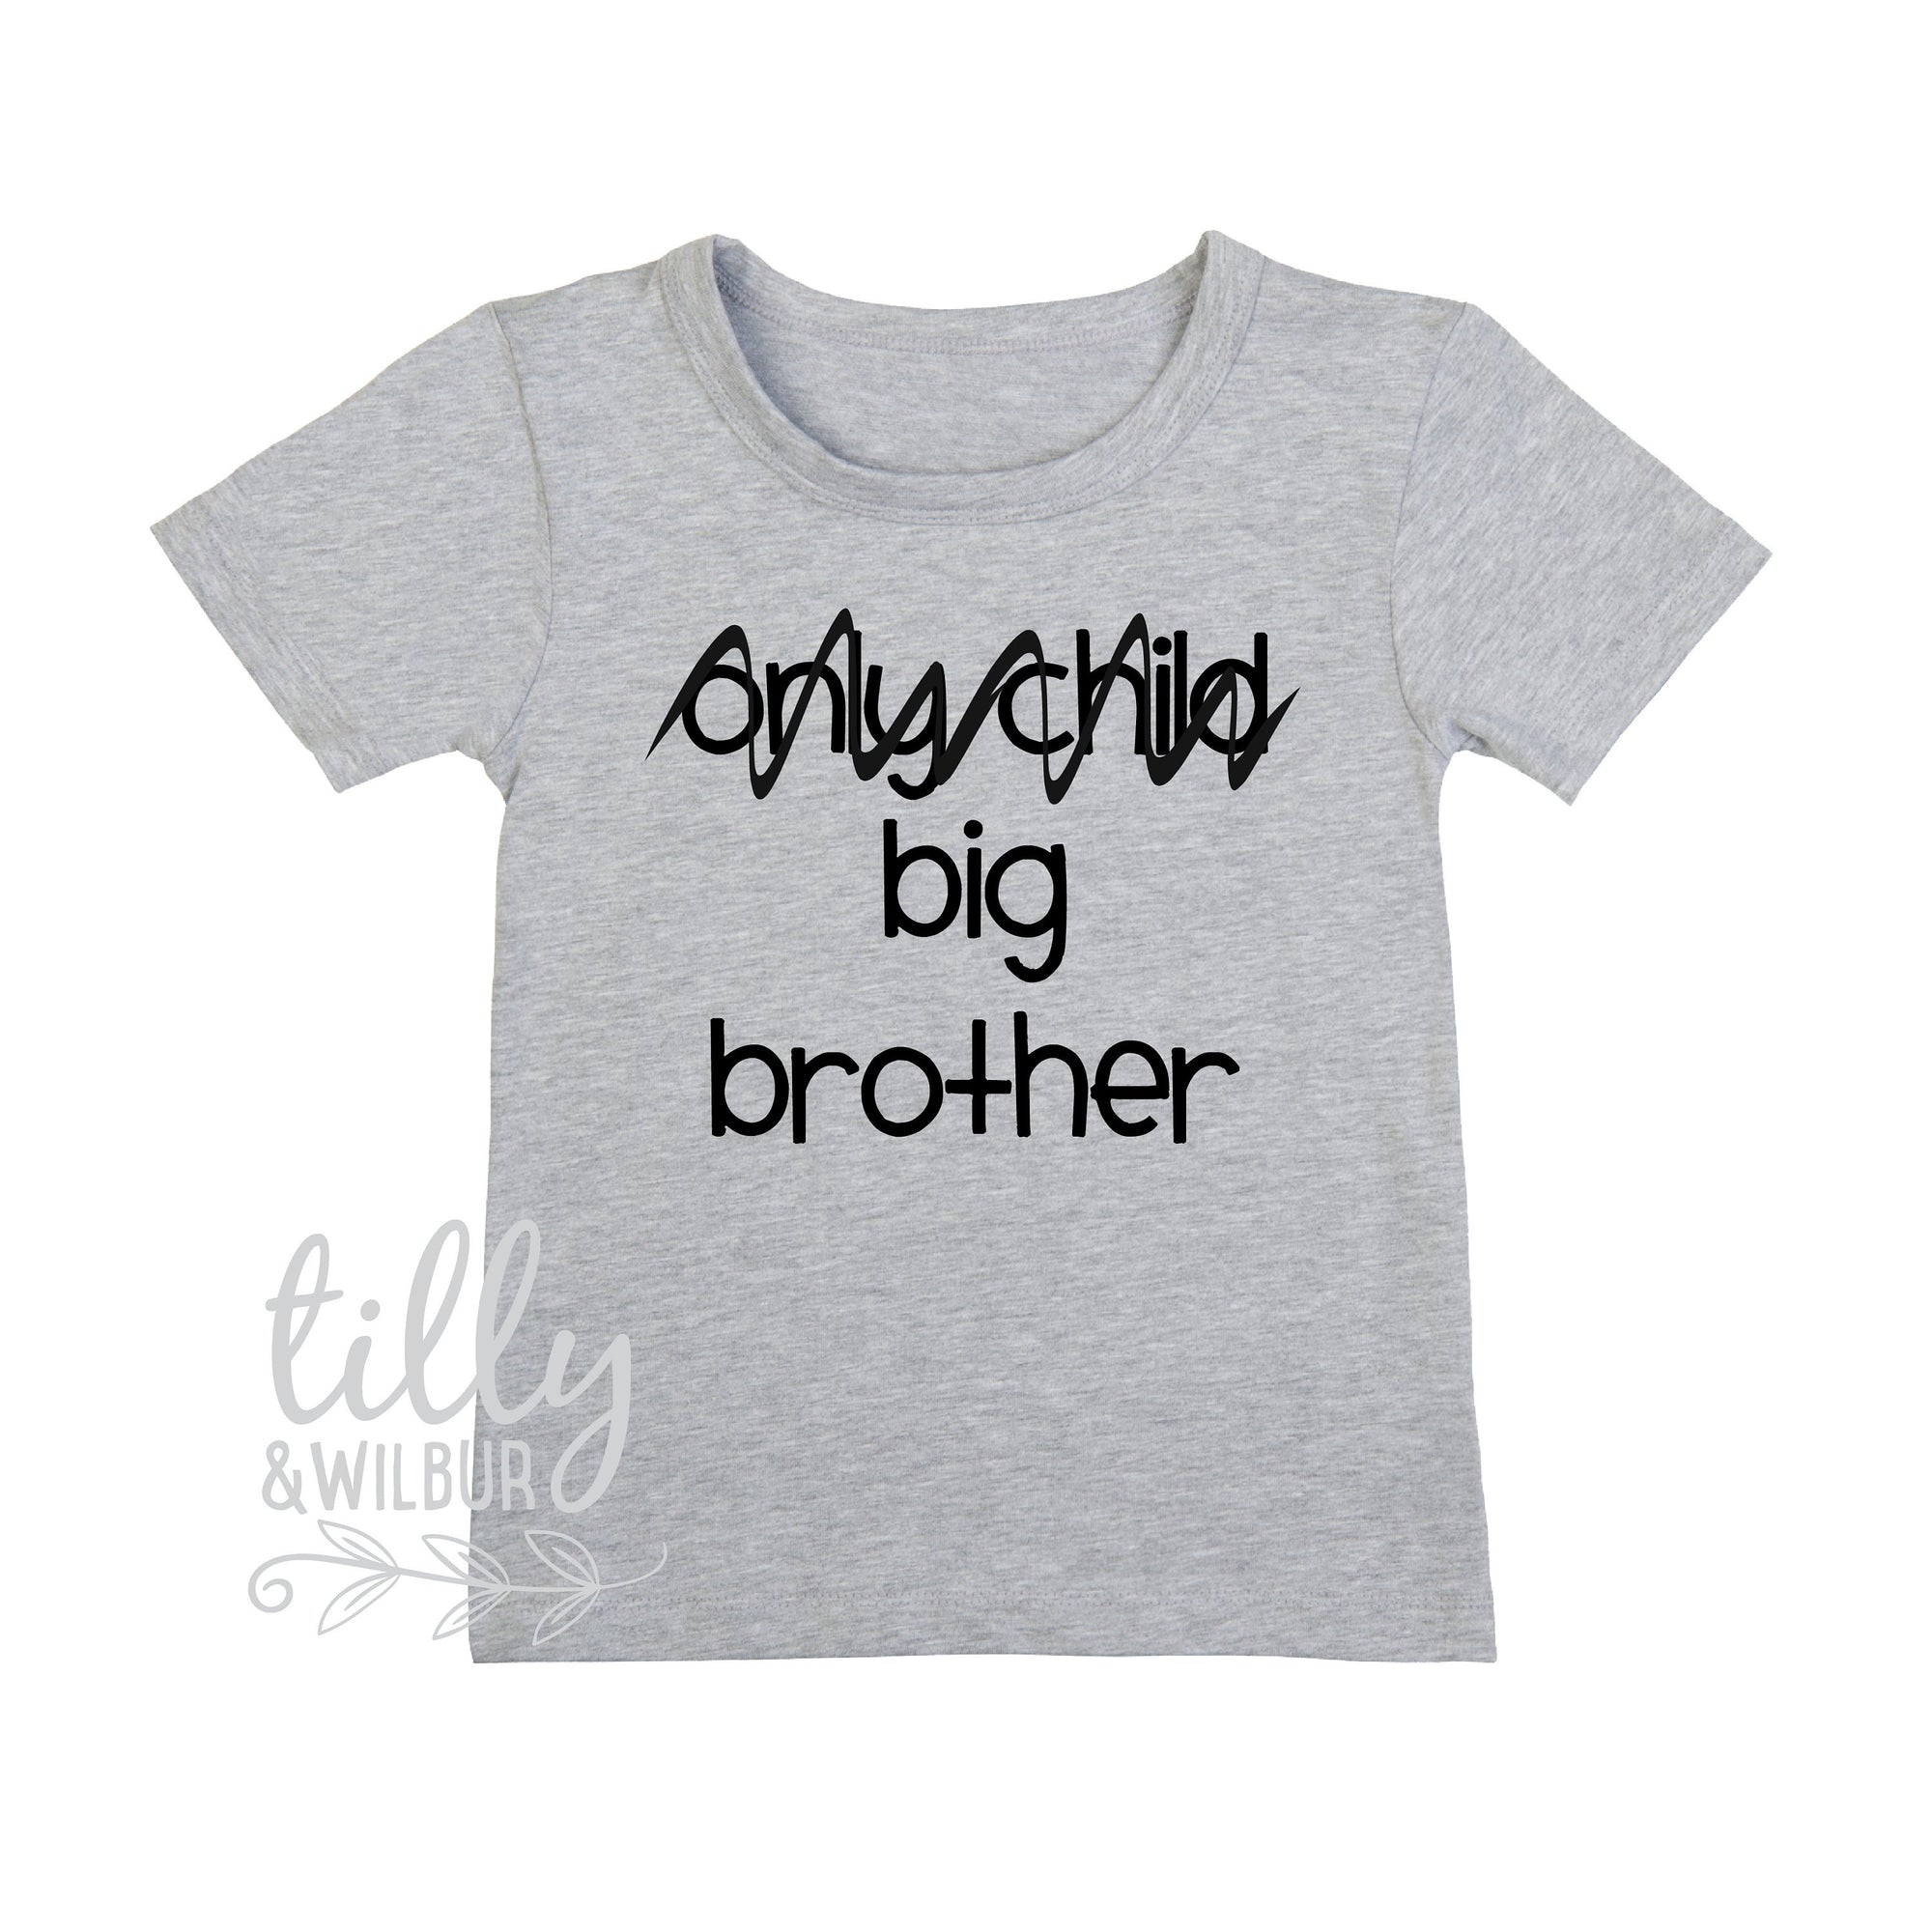 Only Child, Big Brother T-Shirt For Boys, Future Big Brother T-Shirt For Boys, Big Brother Announcement Outfit, Pregnancy Announcement Shirt